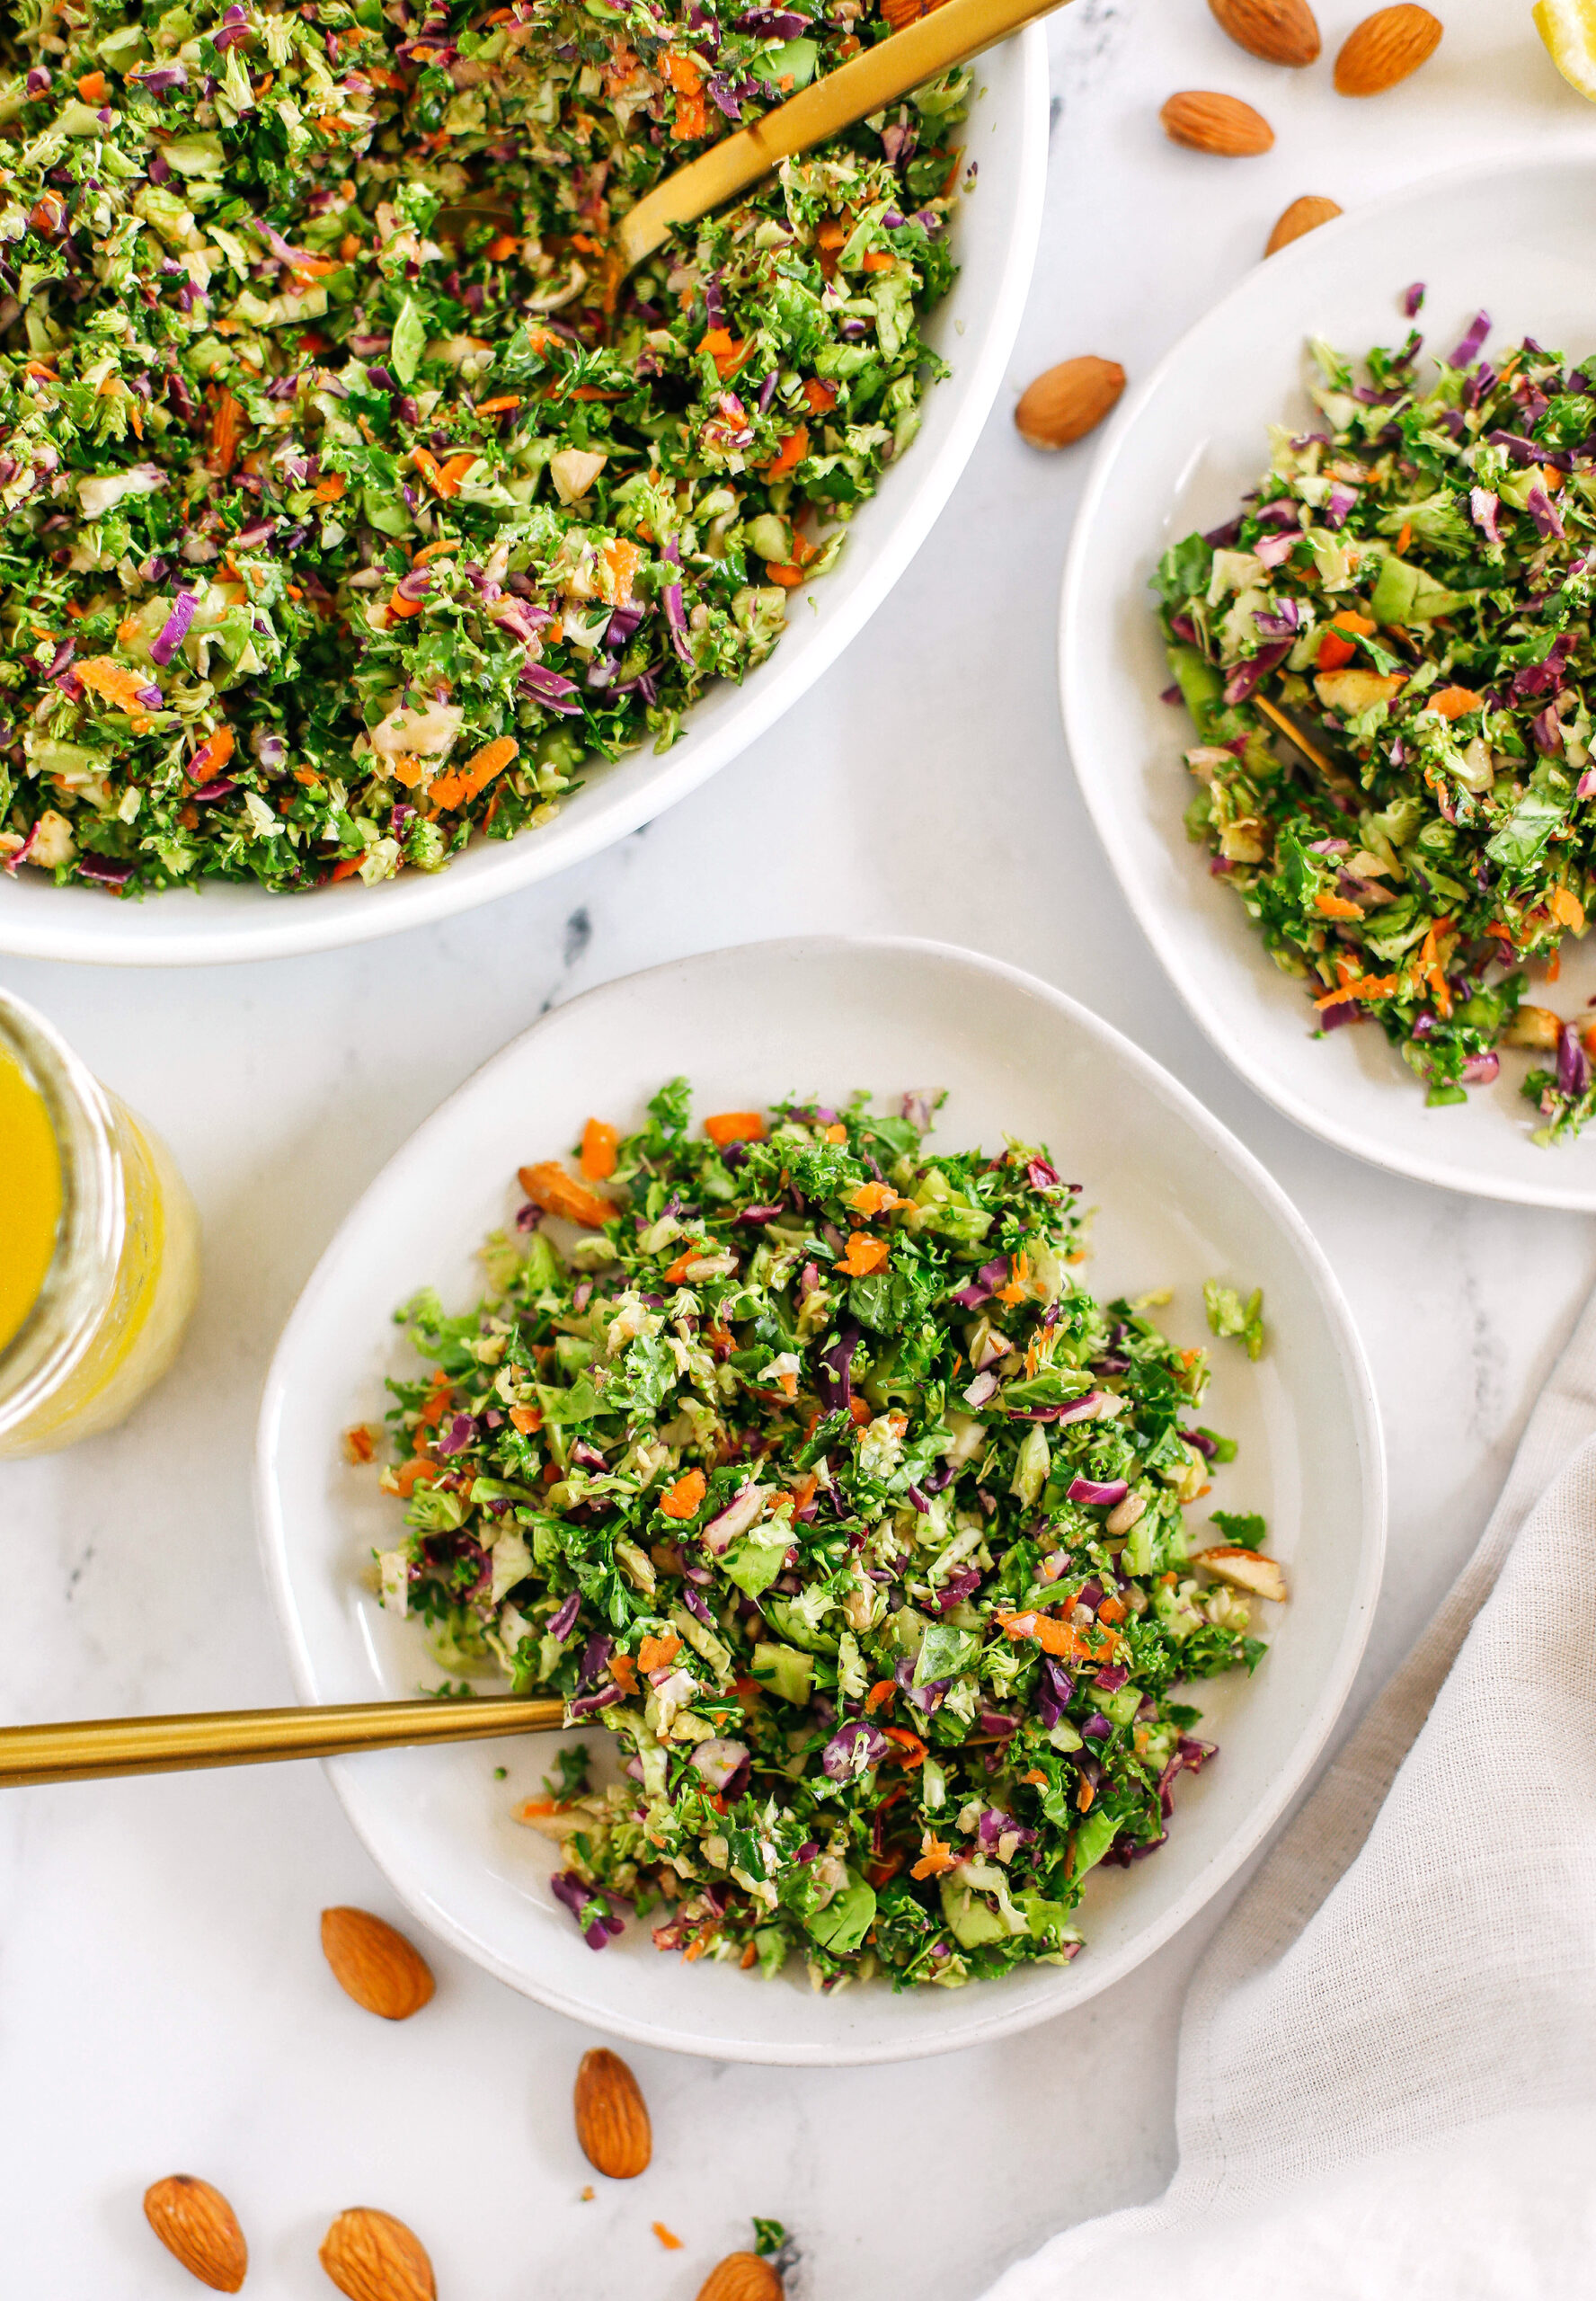 My FAVORITE Detox Salad that is healthy and loaded with fresh veggies like brussels sprouts, broccoli, kale and cabbage all drizzled with a lemony ginger dressing!  This salad makes a ton to last you all week!